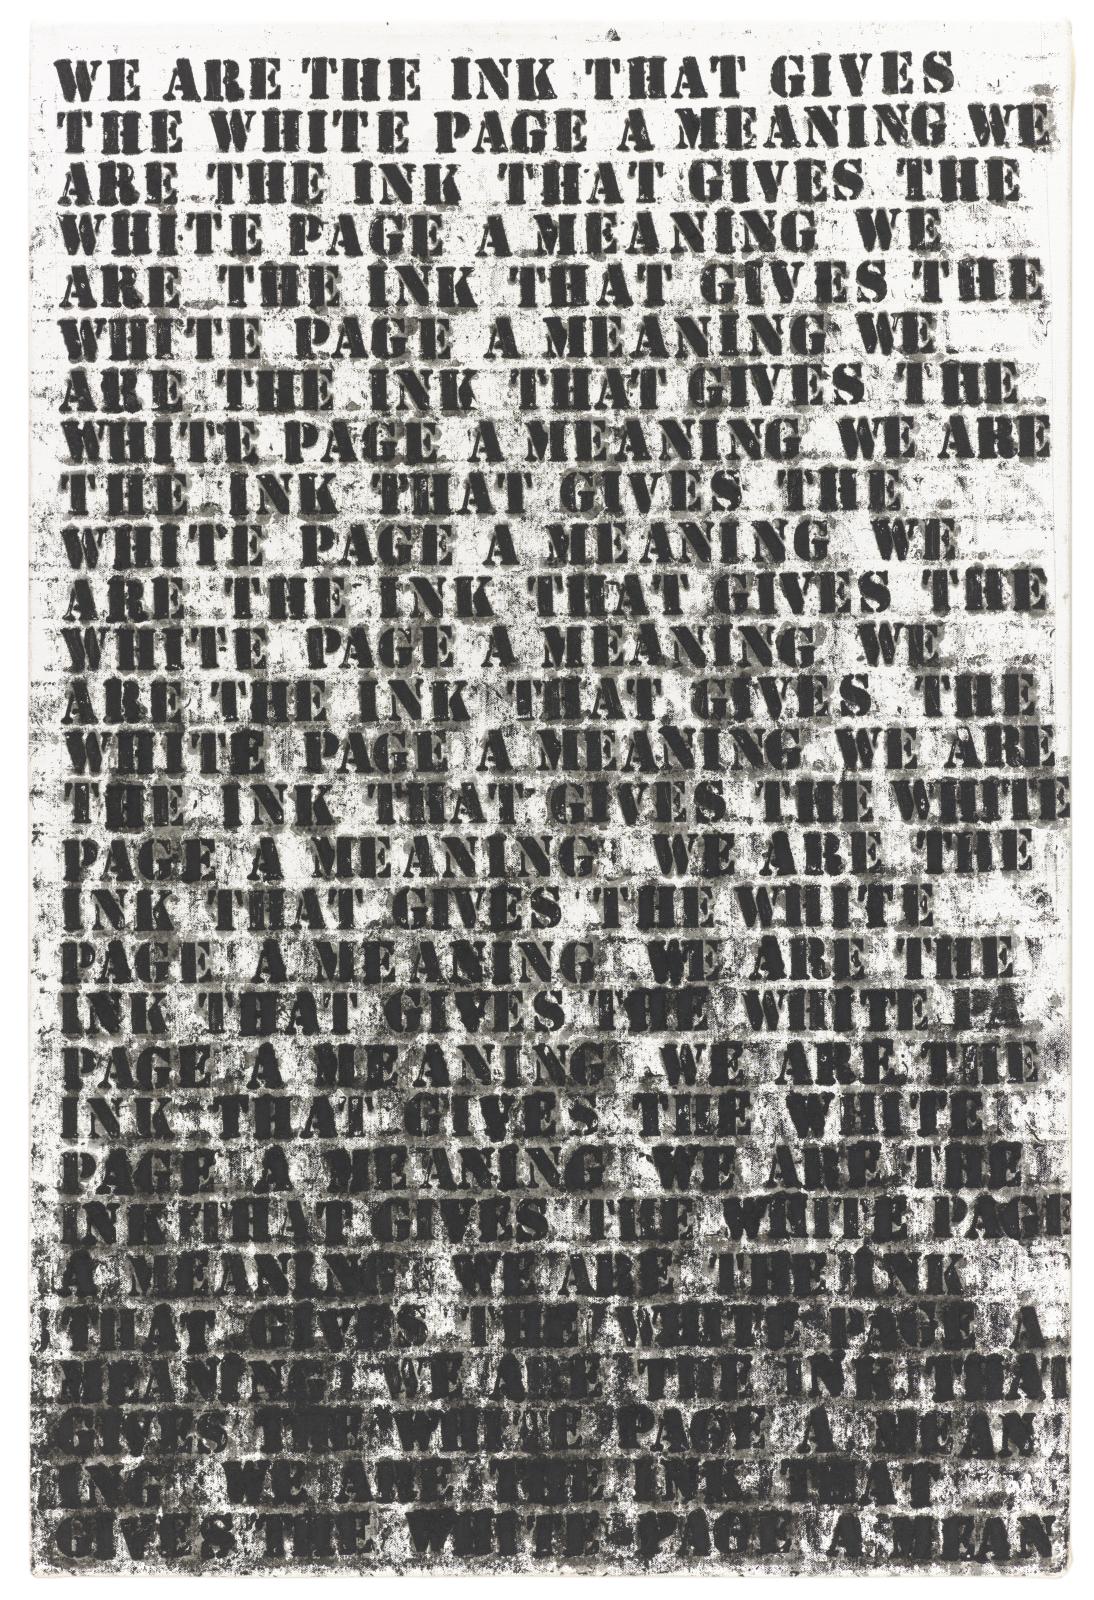 Black stenciled text that reads "WE ARE THE INK THAT GIVES THE WHITE PAGE A MEANING" repeats for twenty-nine lines, gradually becoming distorted until it's almost illegible at the bottom.